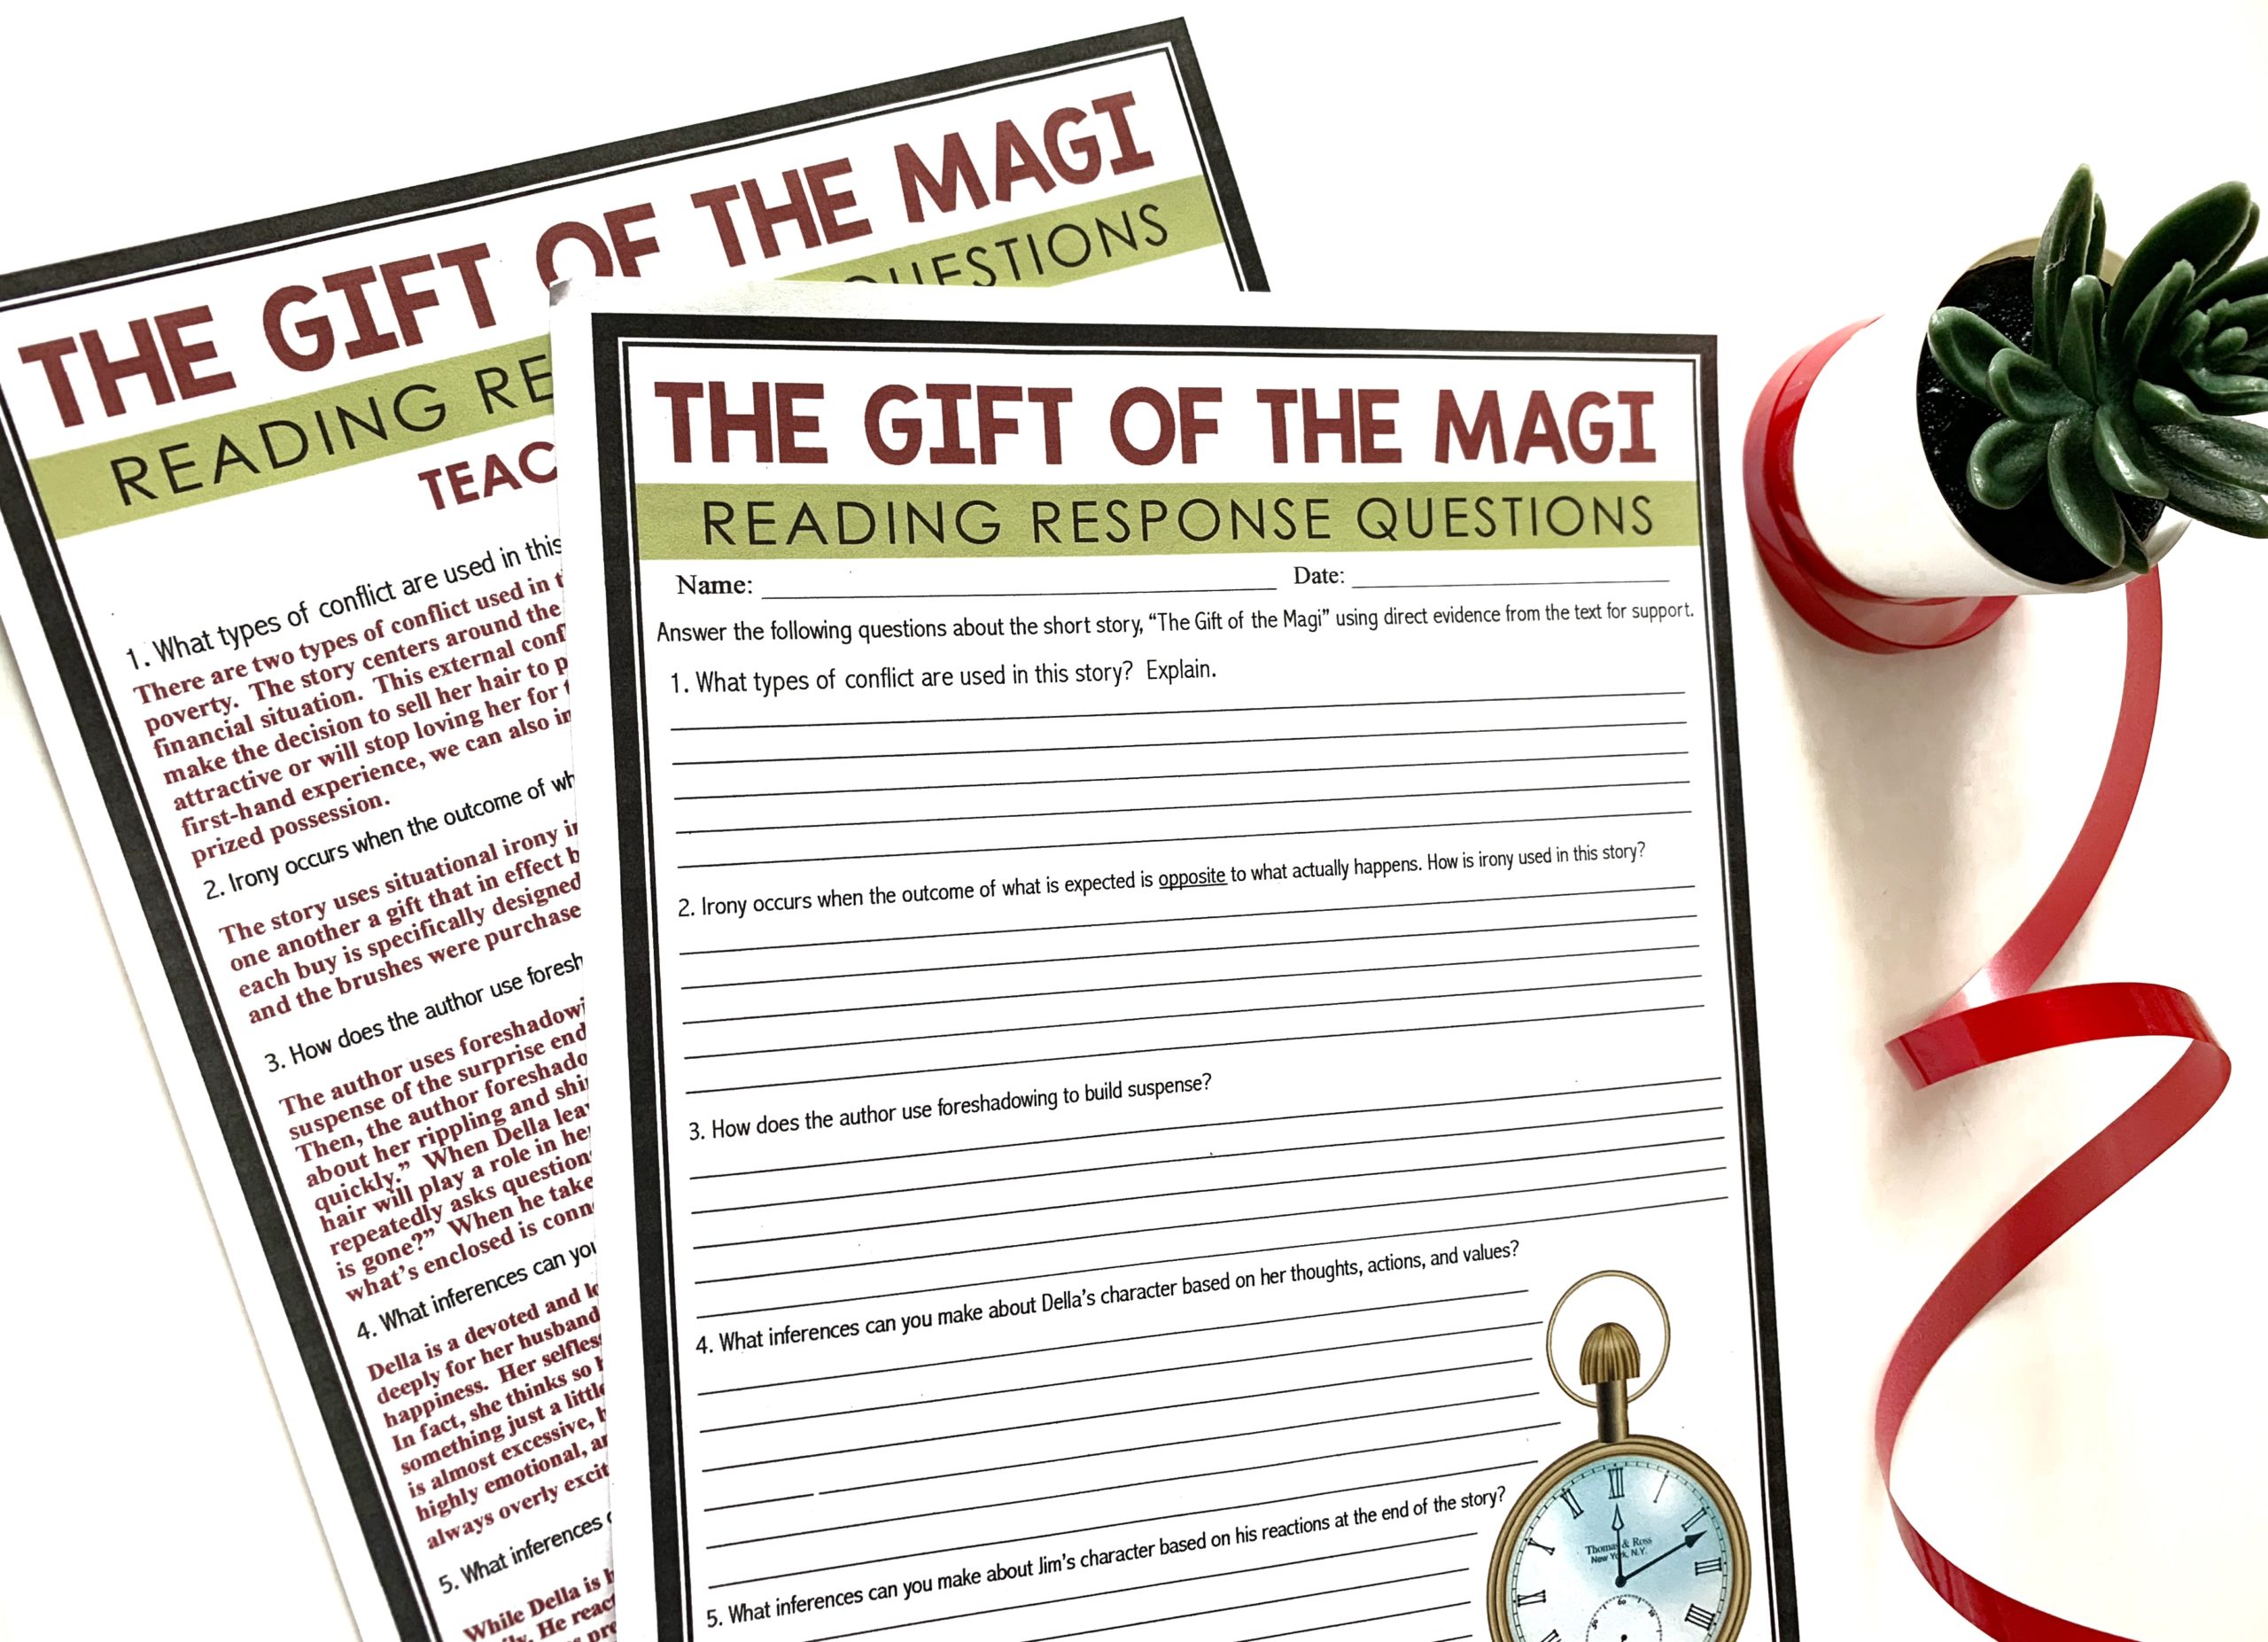 Teaching The Gift of the Magi Analysis Questions